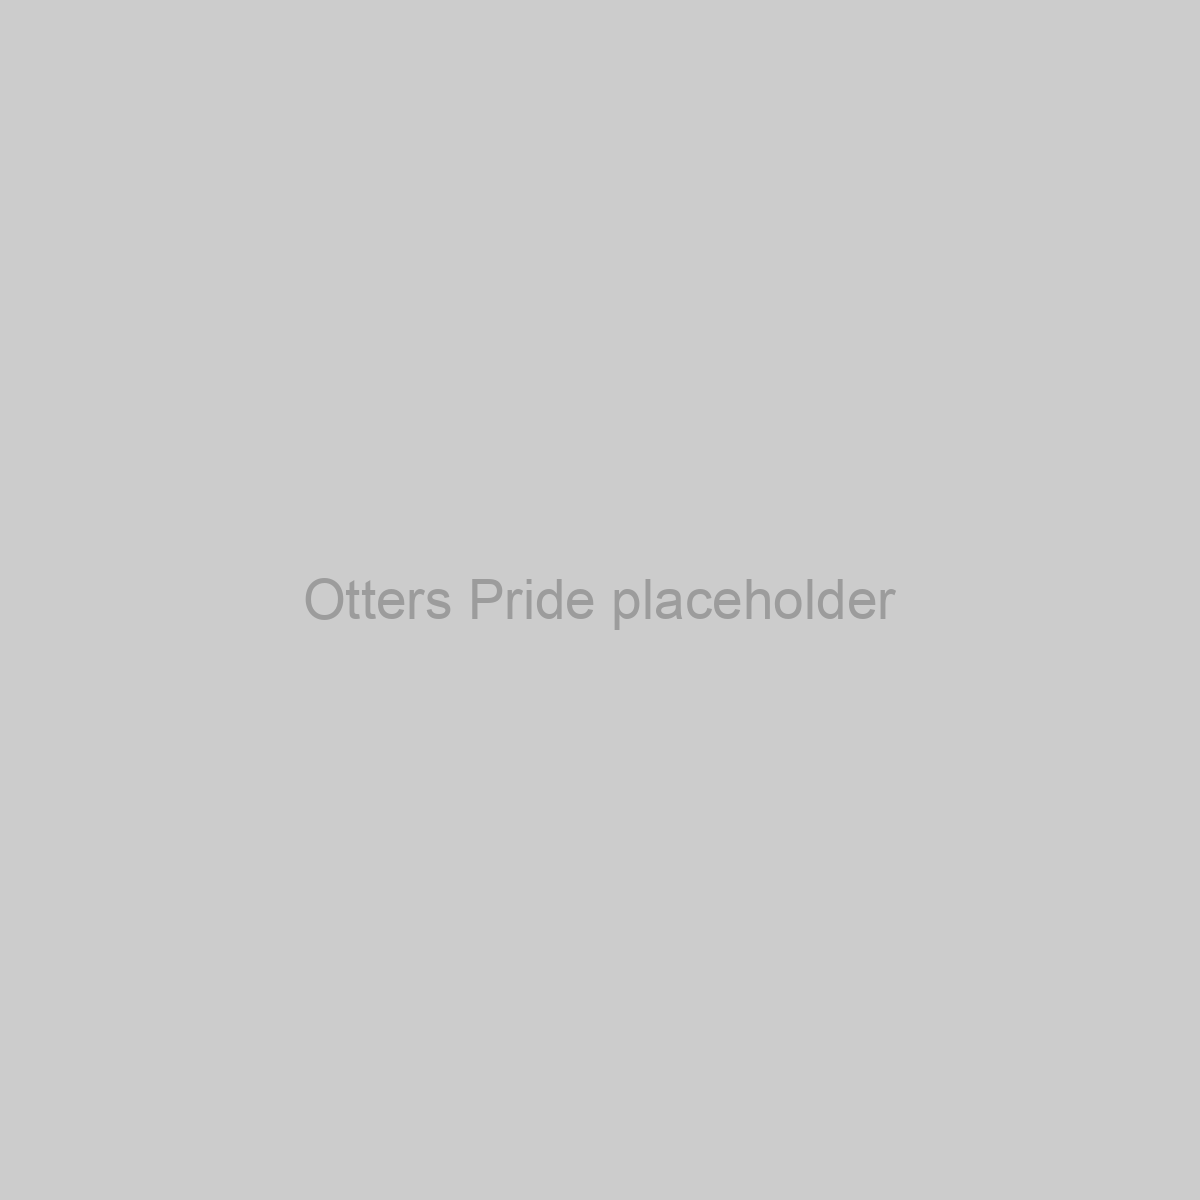 Otters Pride Placeholder Image